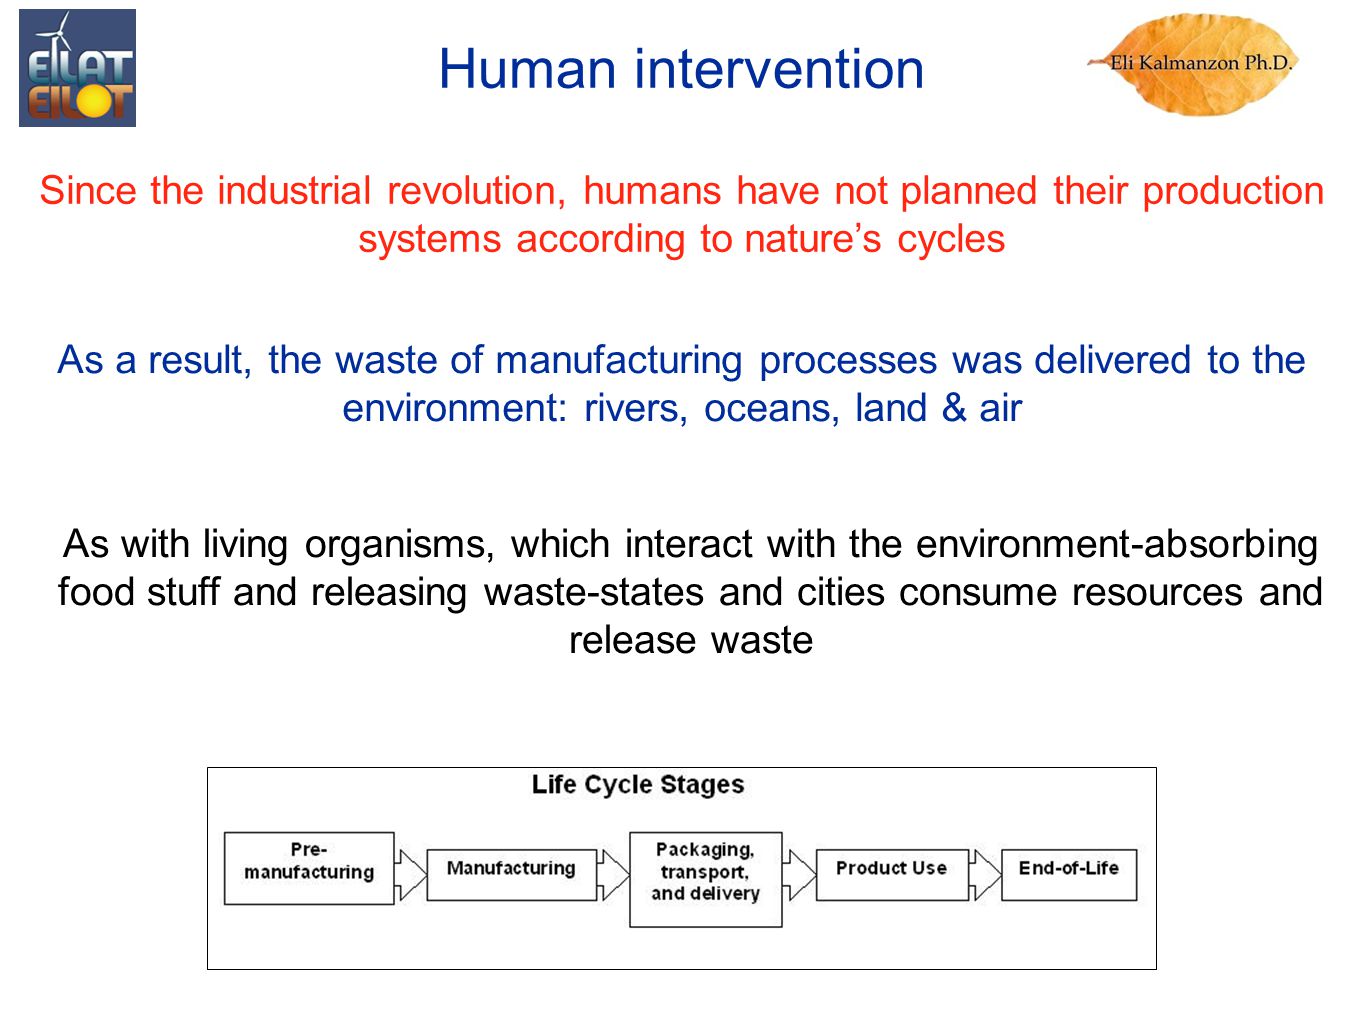 Since the industrial revolution, humans have not planned their production systems according to nature’s cycles Human intervention As a result, the waste of manufacturing processes was delivered to the environment: rivers, oceans, land & air As with living organisms, which interact with the environment-absorbing food stuff and releasing waste-states and cities consume resources and release waste